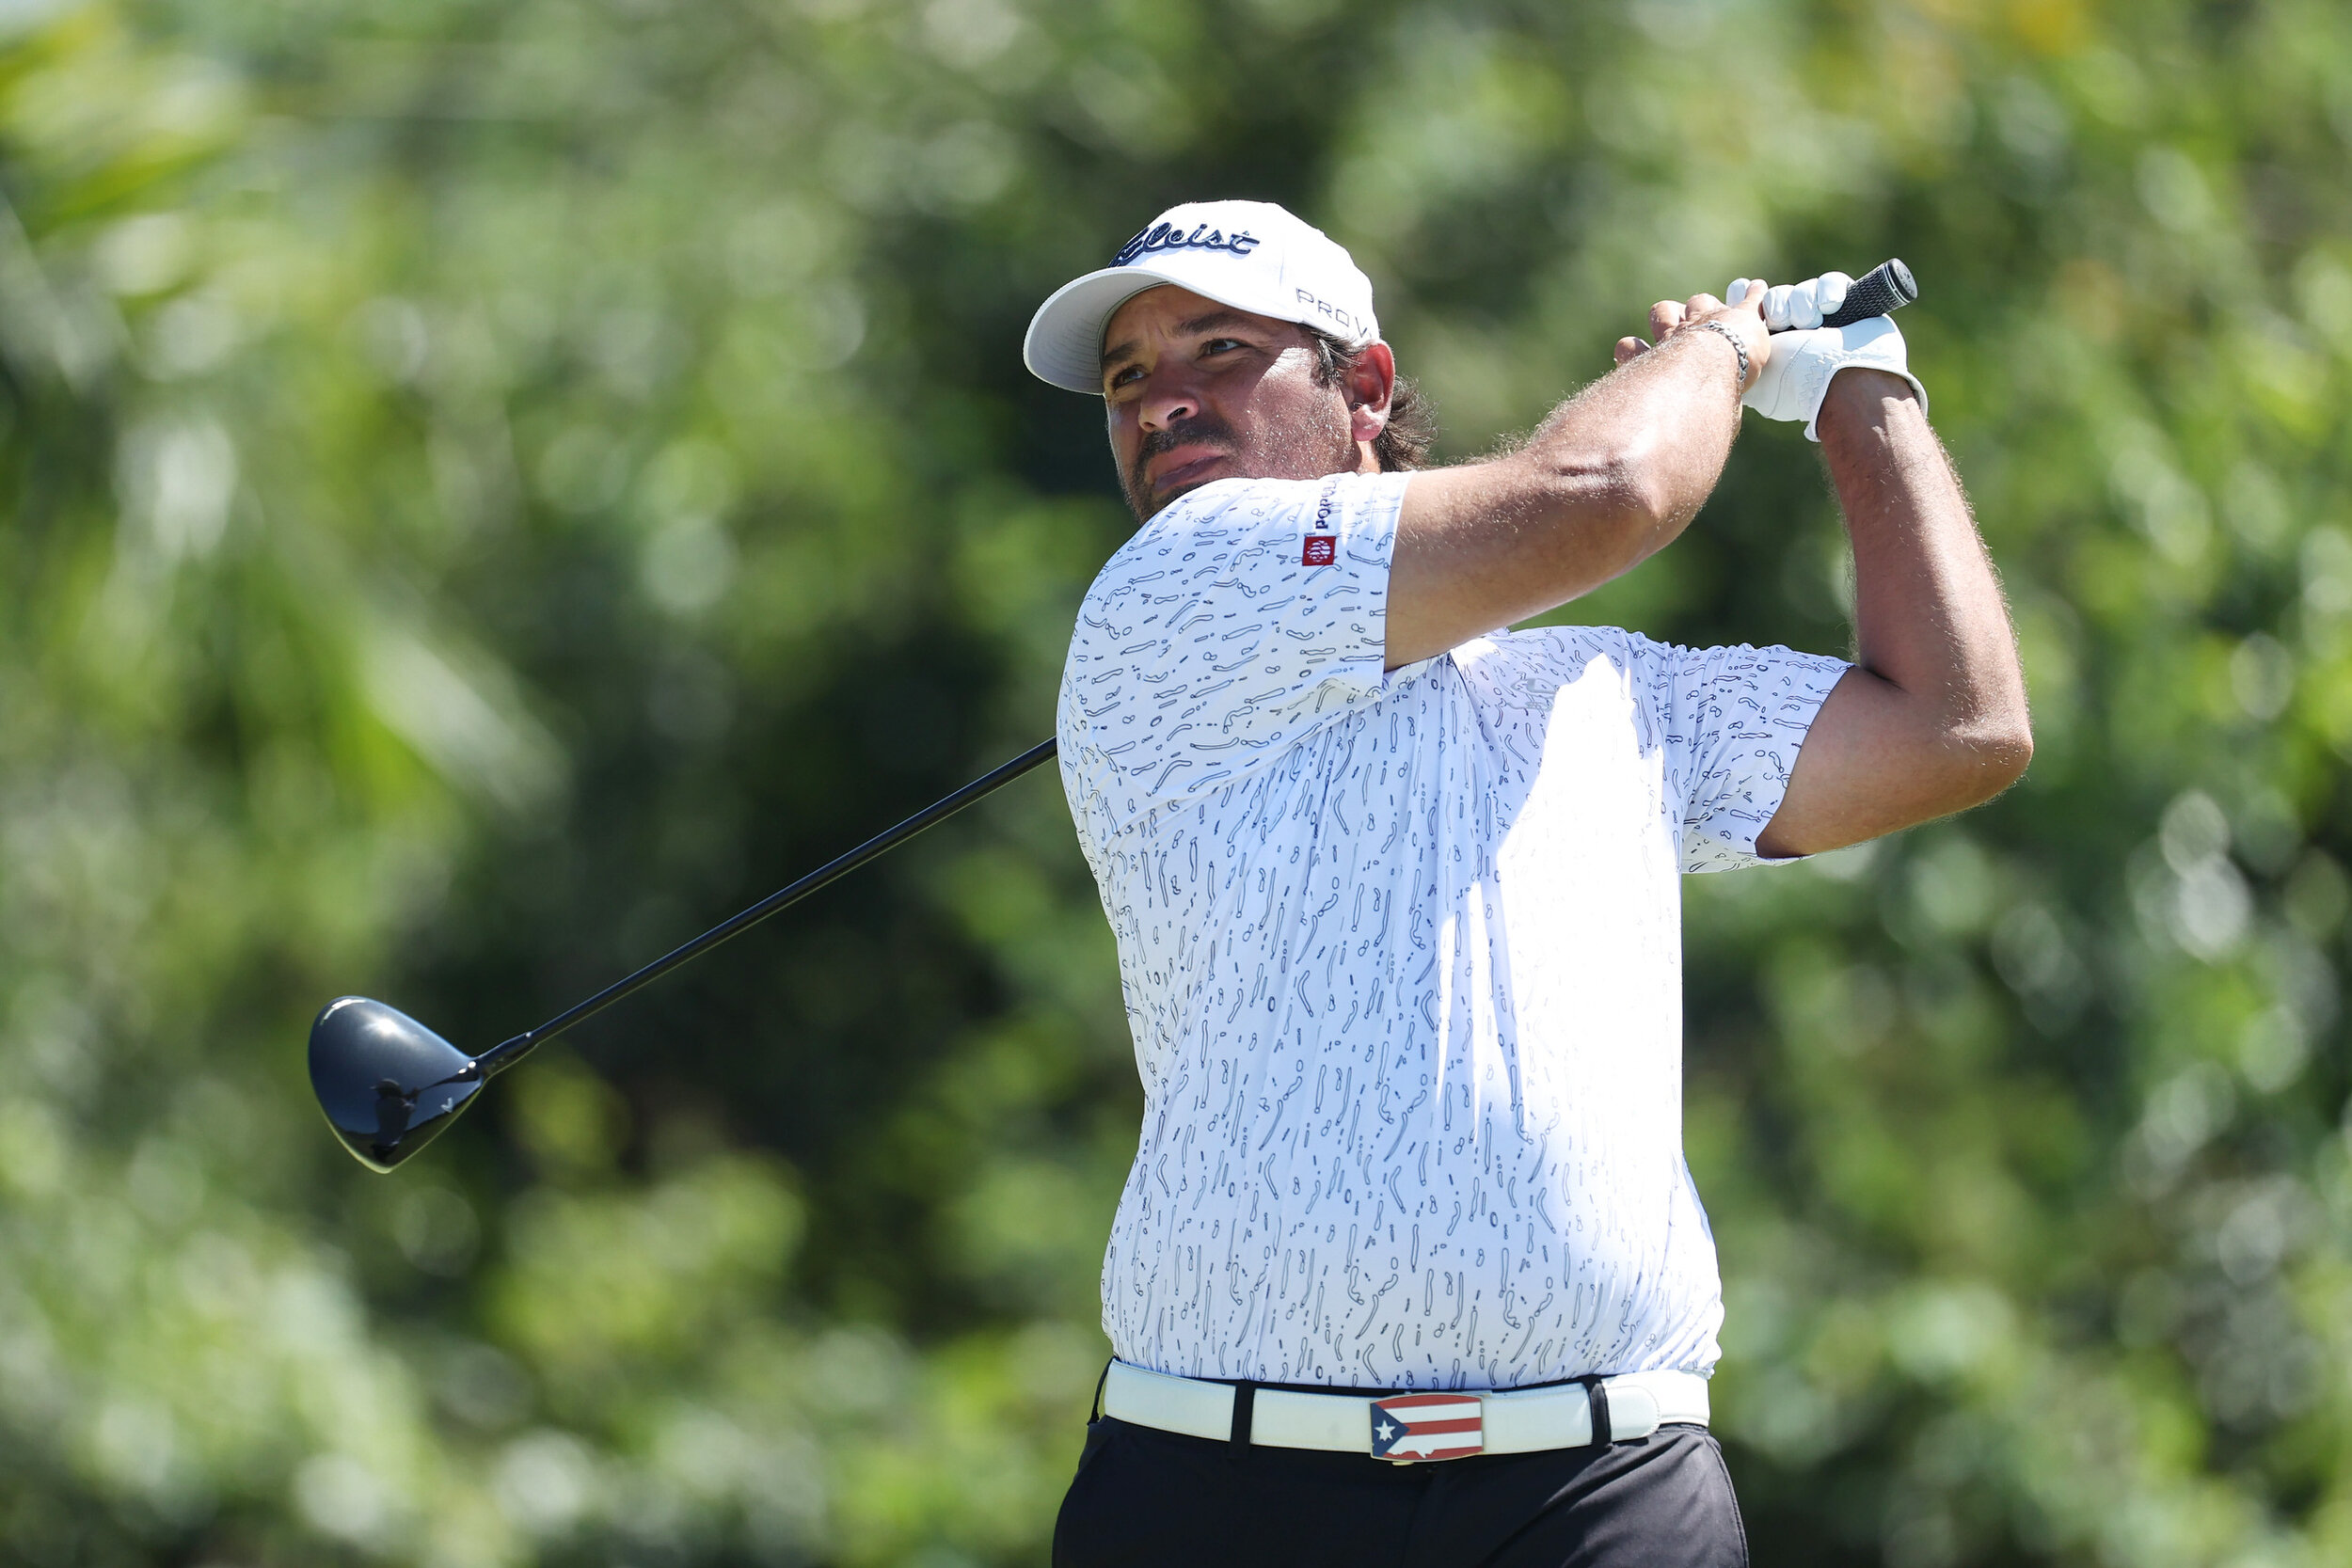  RIO GRANDE, PUERTO RICO - FEBRUARY 28:  Rafael Campos of Puerto Rico plays his shot from the seventh tee during the final round of the Puerto Rico Open at the Grand Reserve Country Club on February 28, 2021 in Rio Grande, Puerto Rico. (Photo by Andy